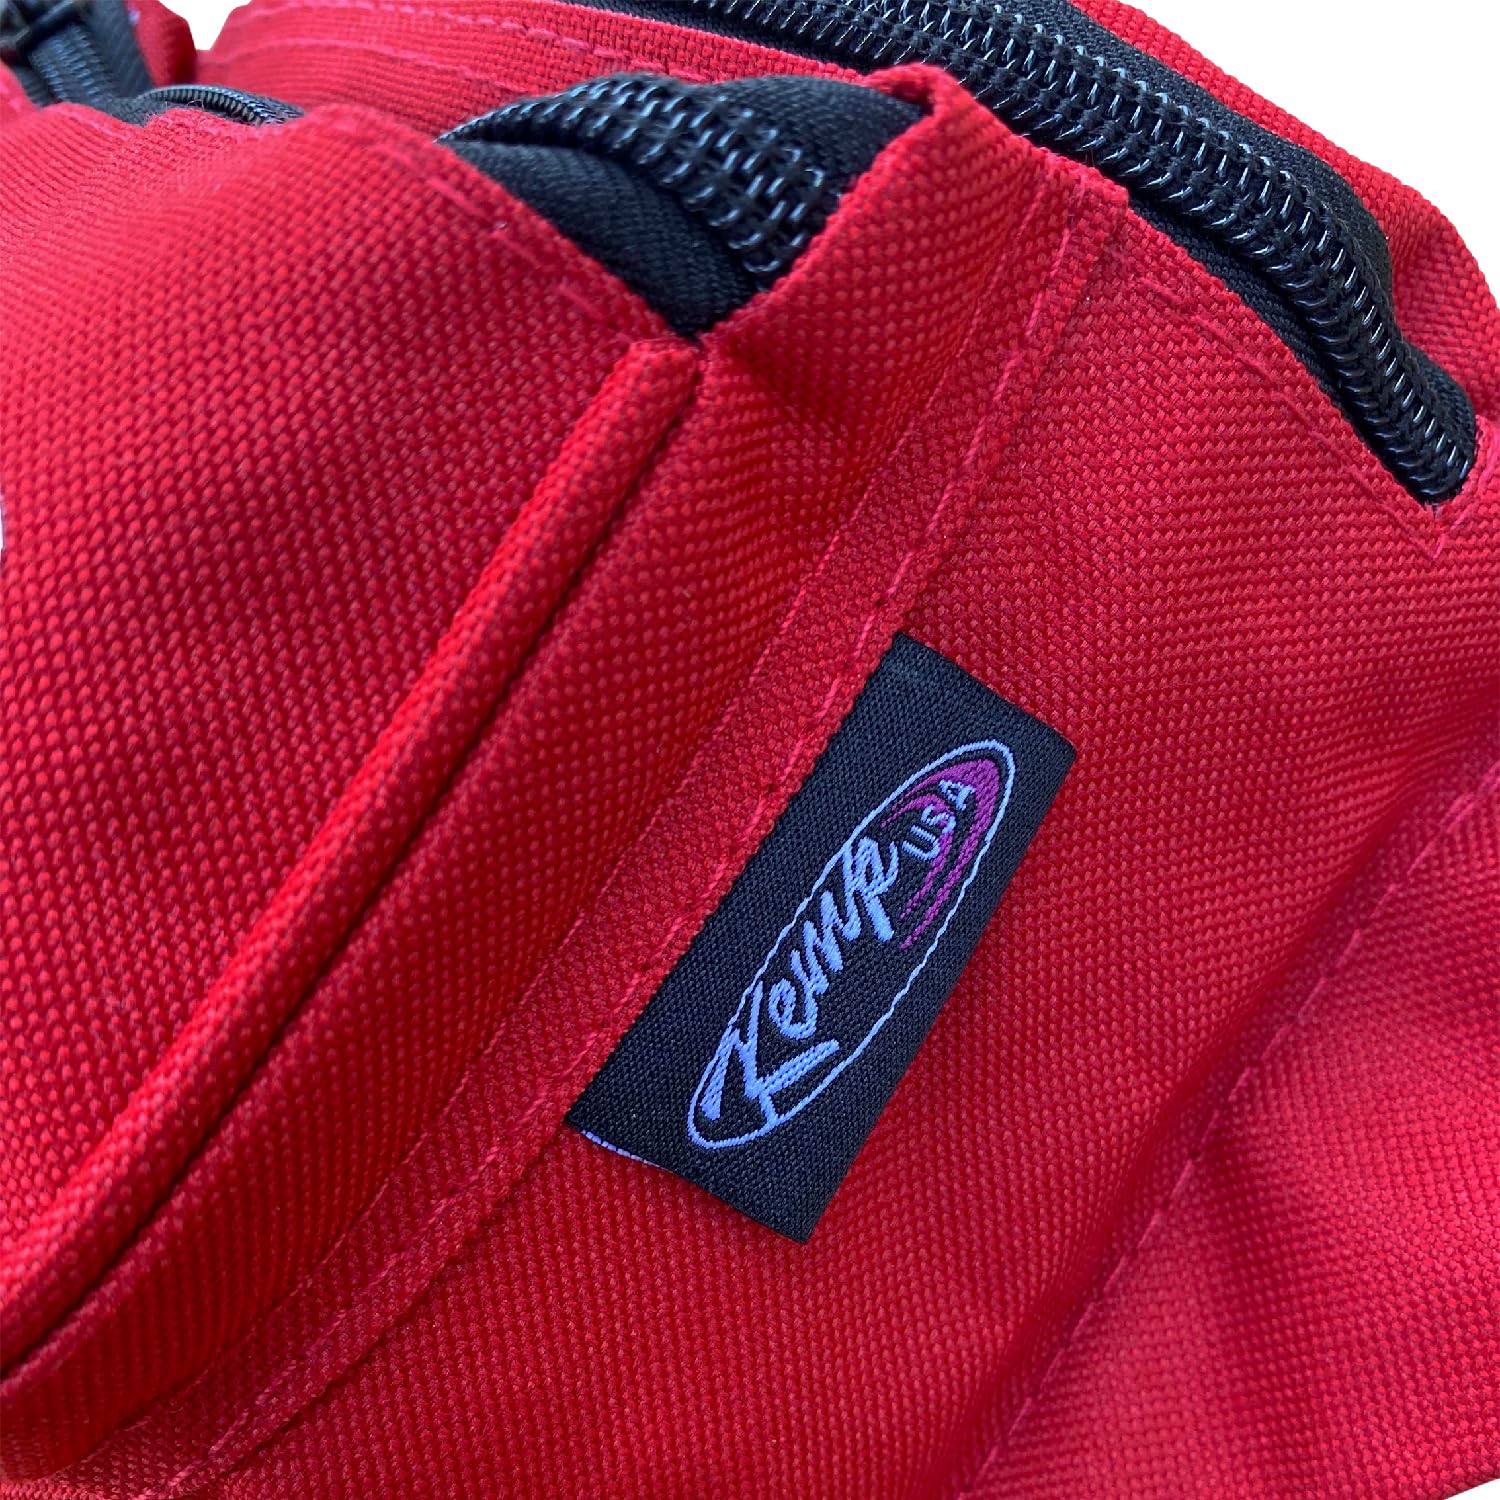 Kemp USA Lifeguard Fanny/Hip Pack with GUARD Logo, Water Resistant & Durable, Red